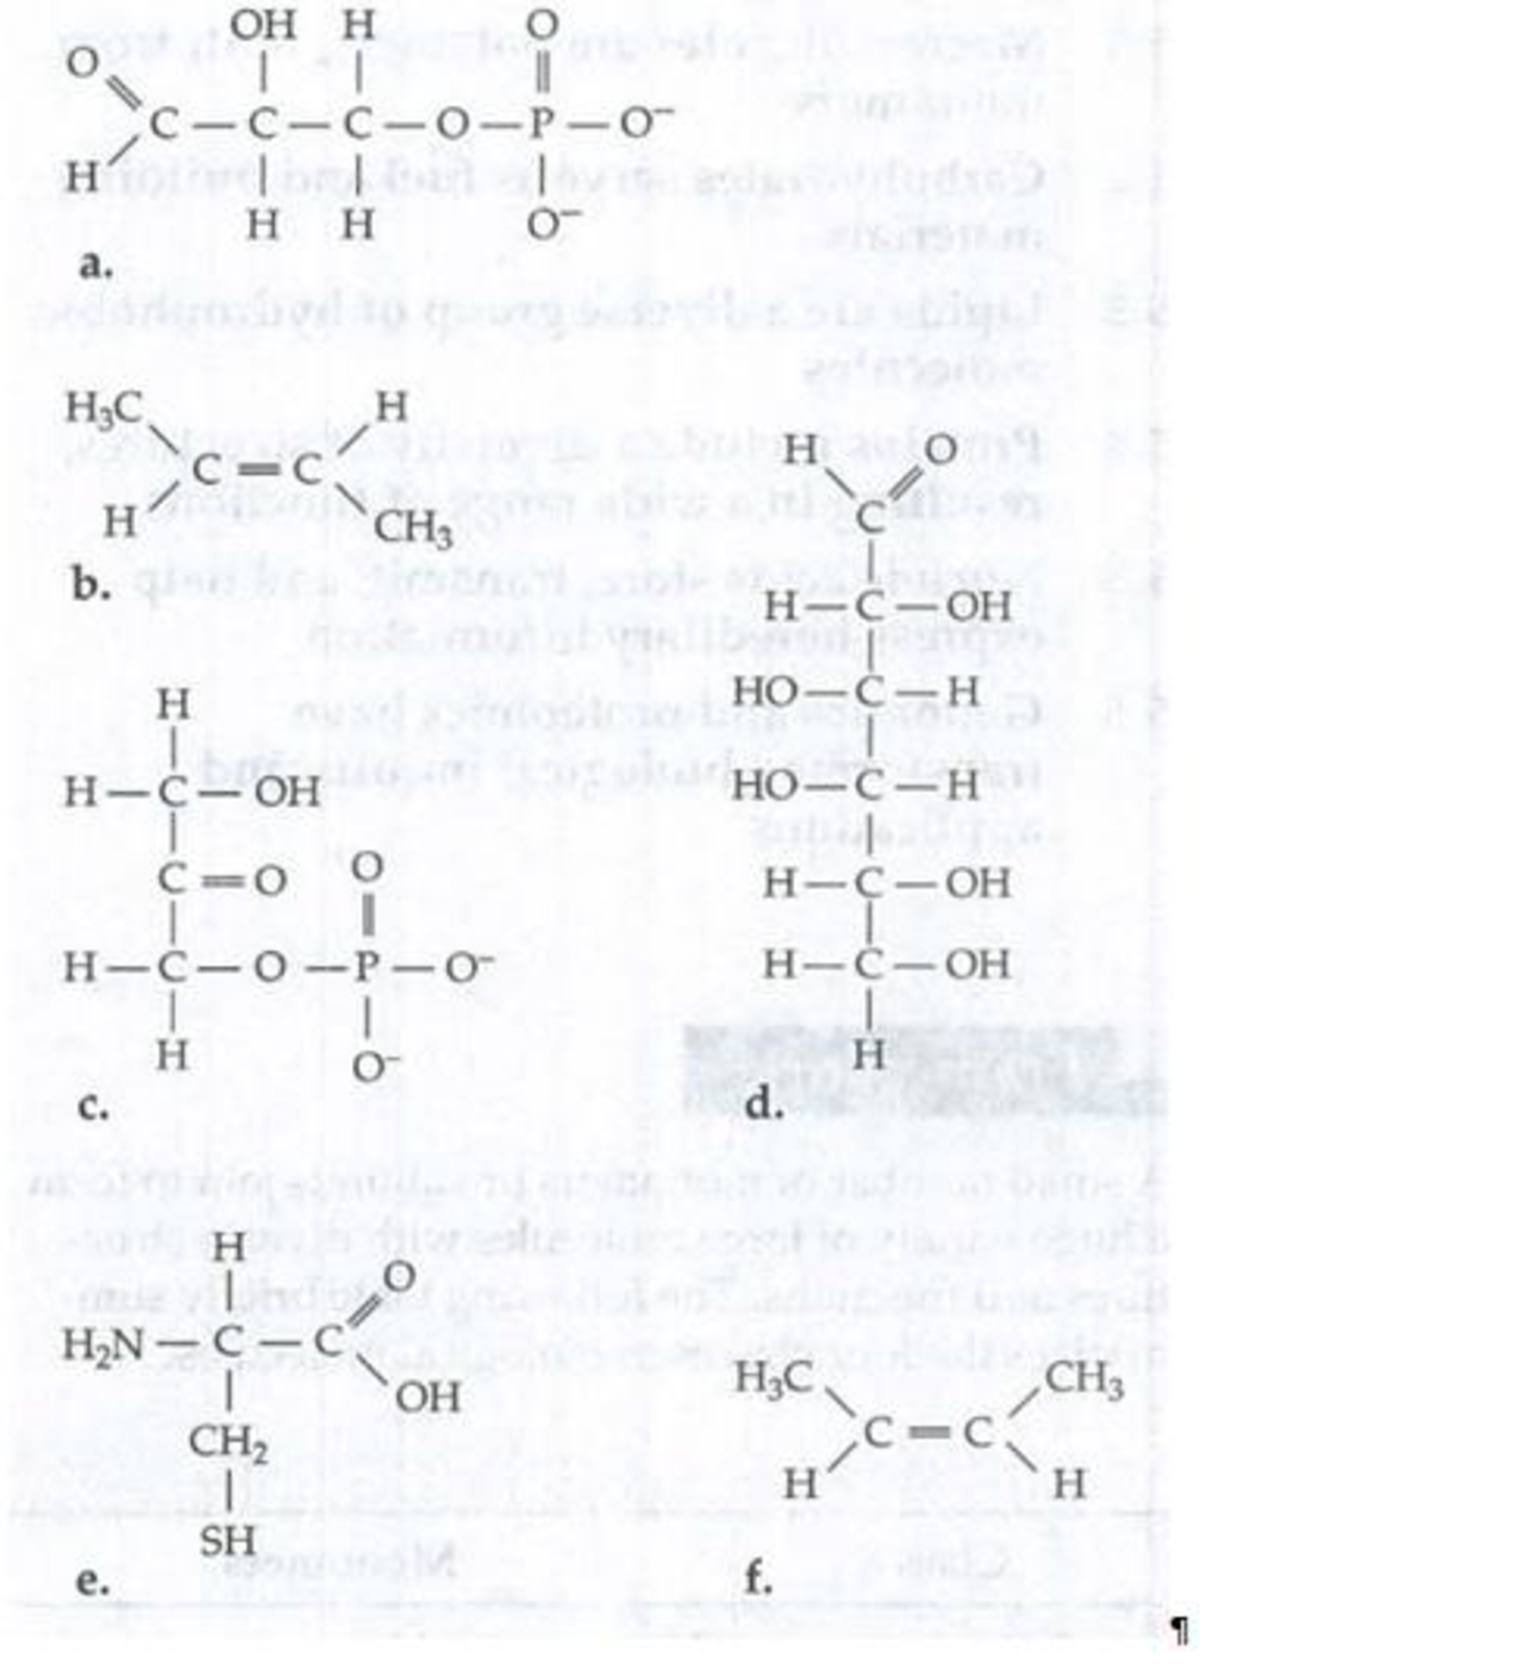 Chapter 4, Problem 9TYKM, organic phosphate 